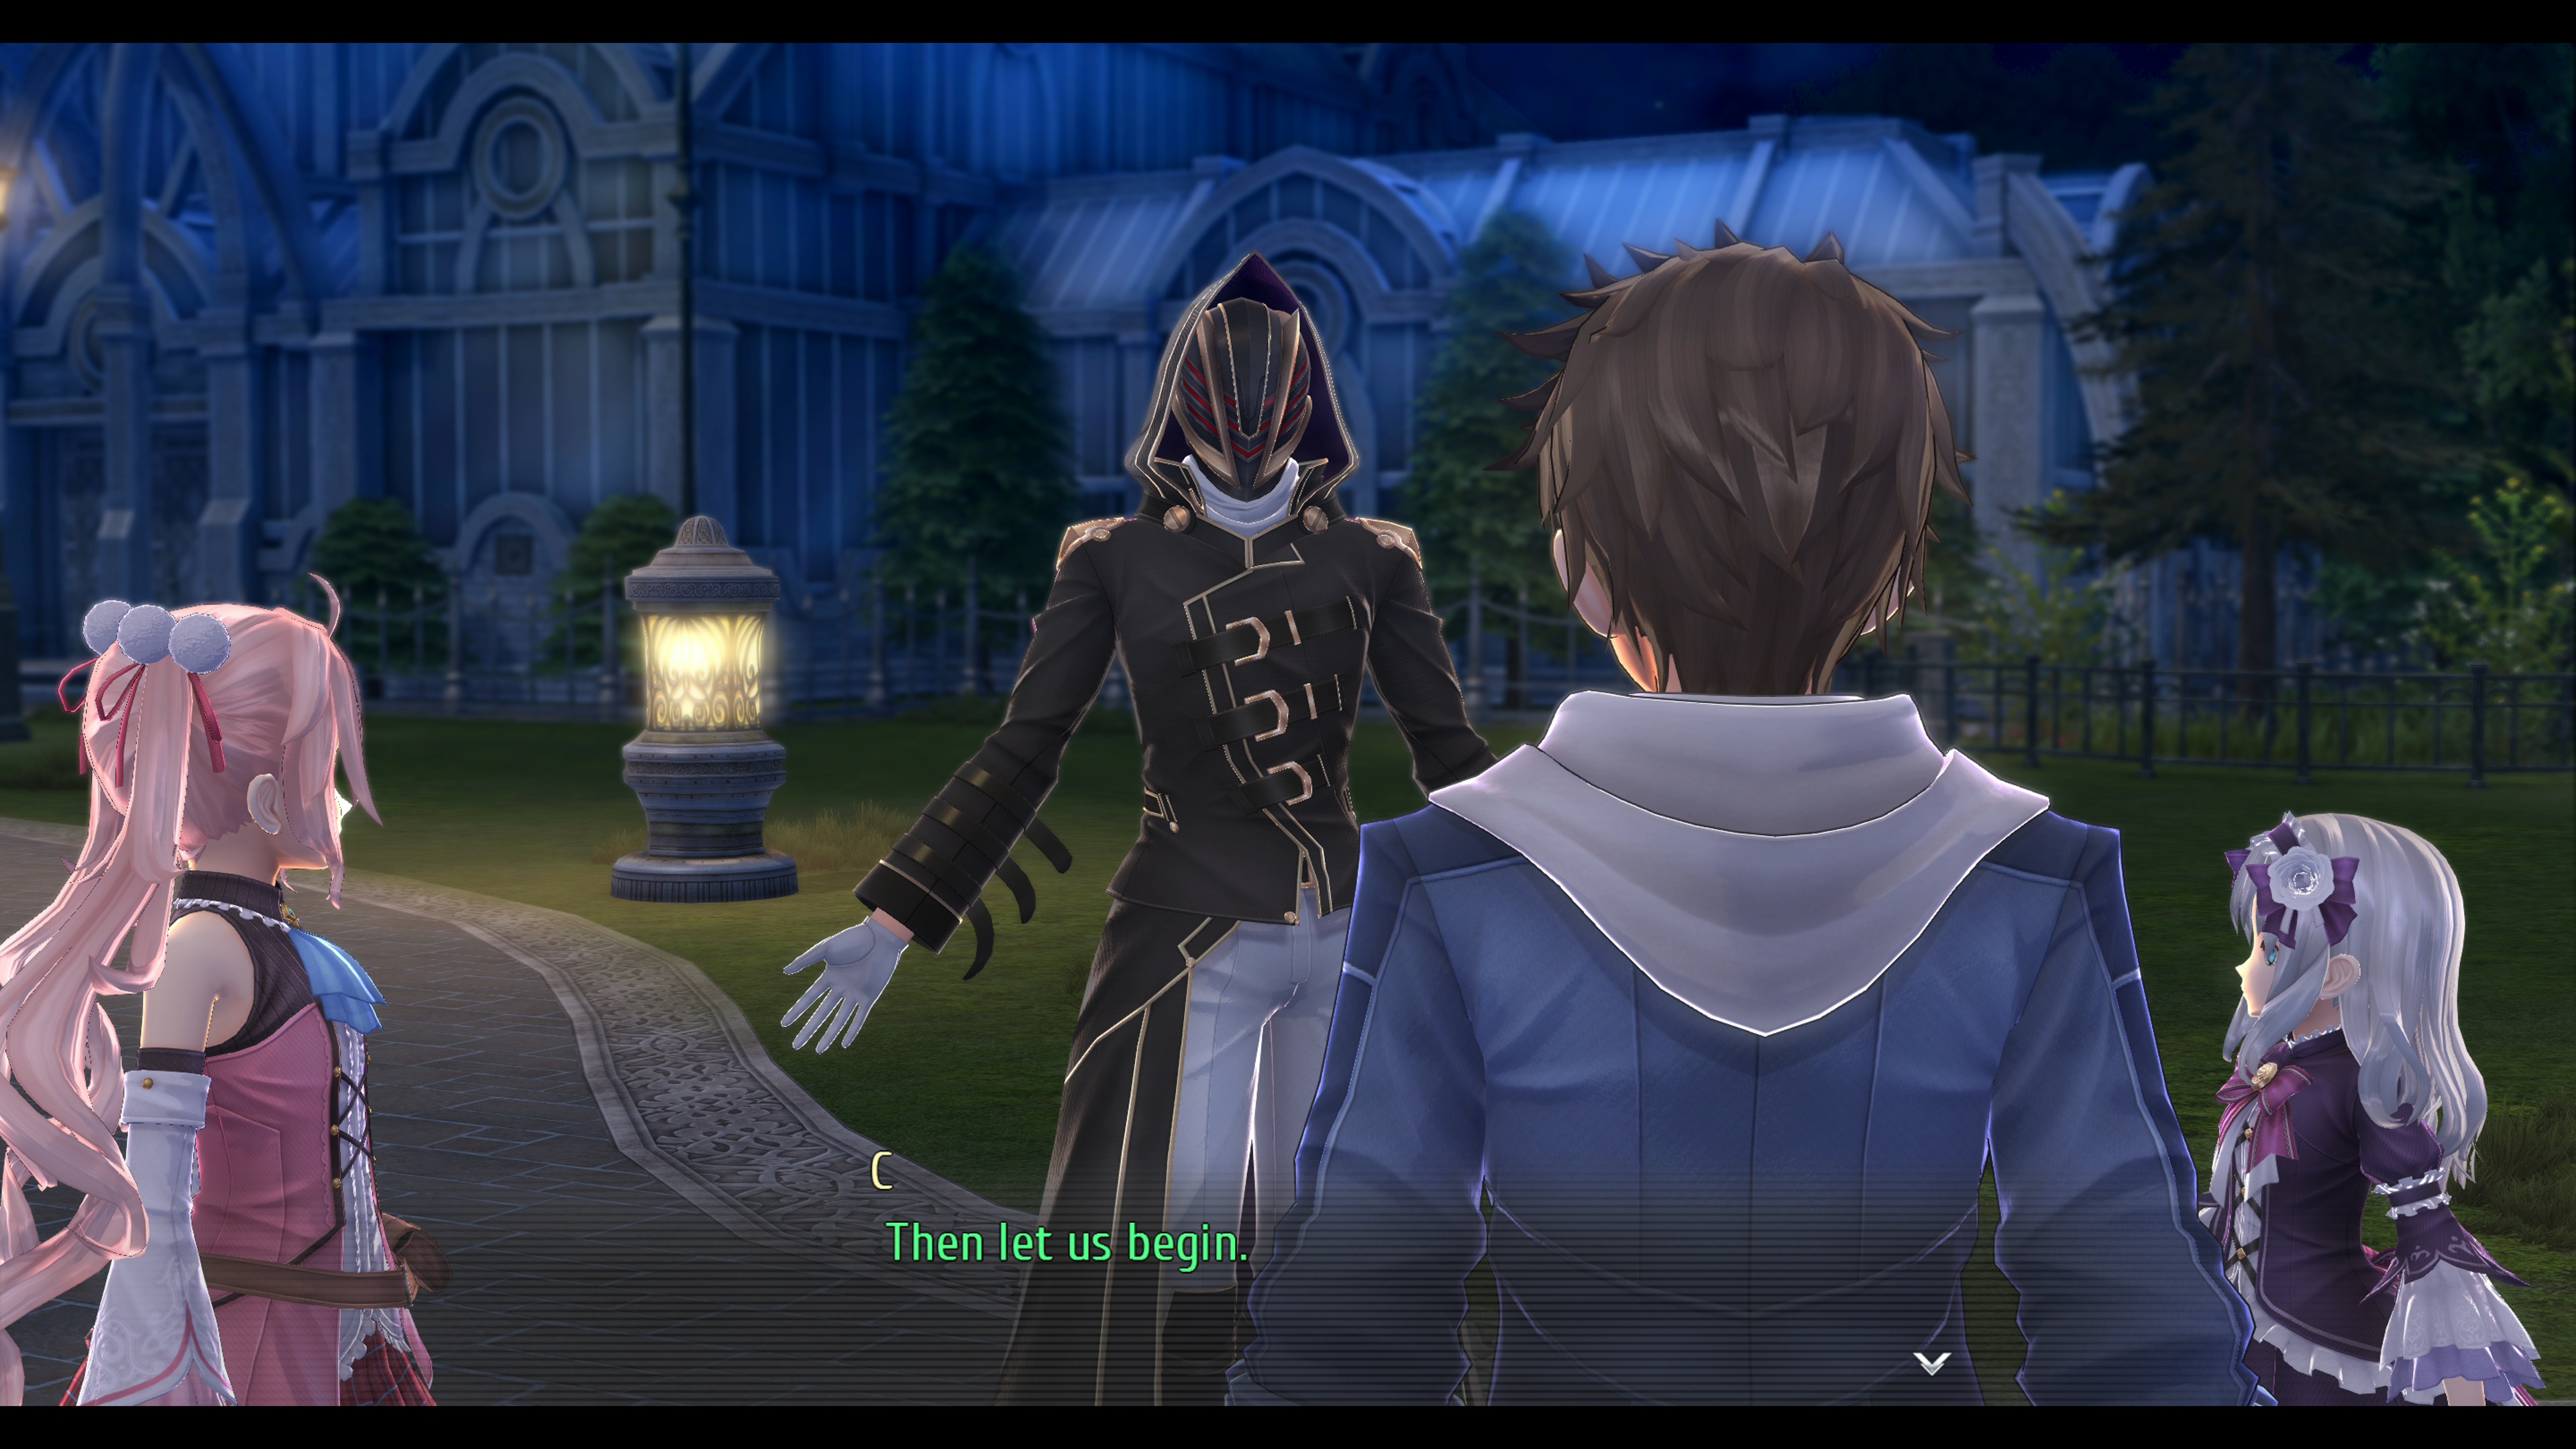 Trails into Reverie review: An anime man in a black coat and black mask is standing on a grassy verge, speaking with three anime children armed with knives